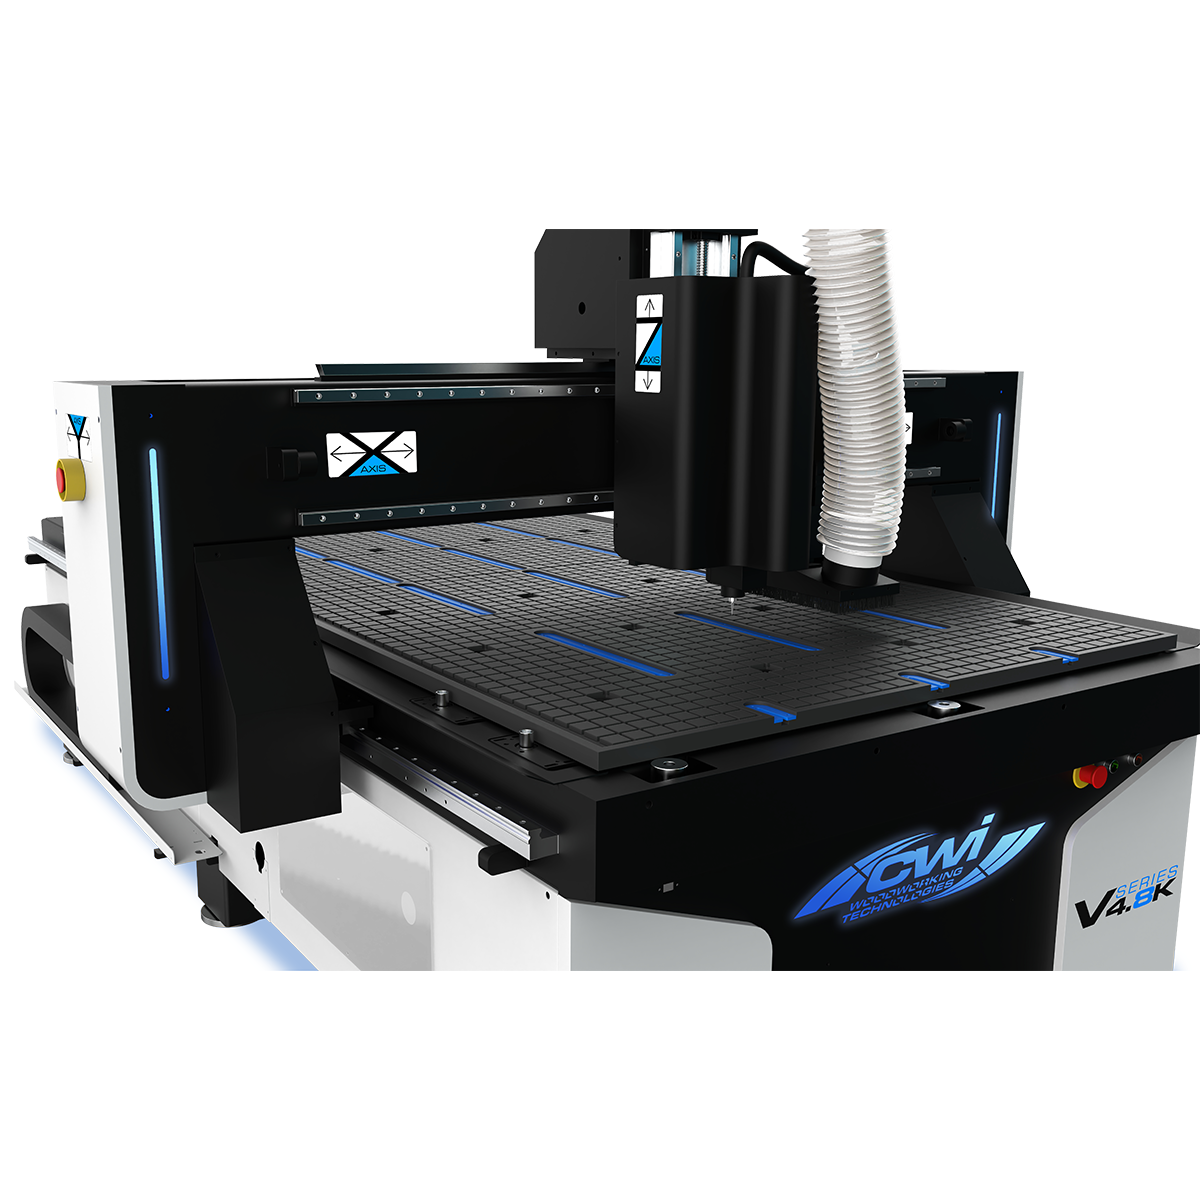 SignMeister V4.8K CNC Router 4′ x 8′ w. Oscillating Knife System